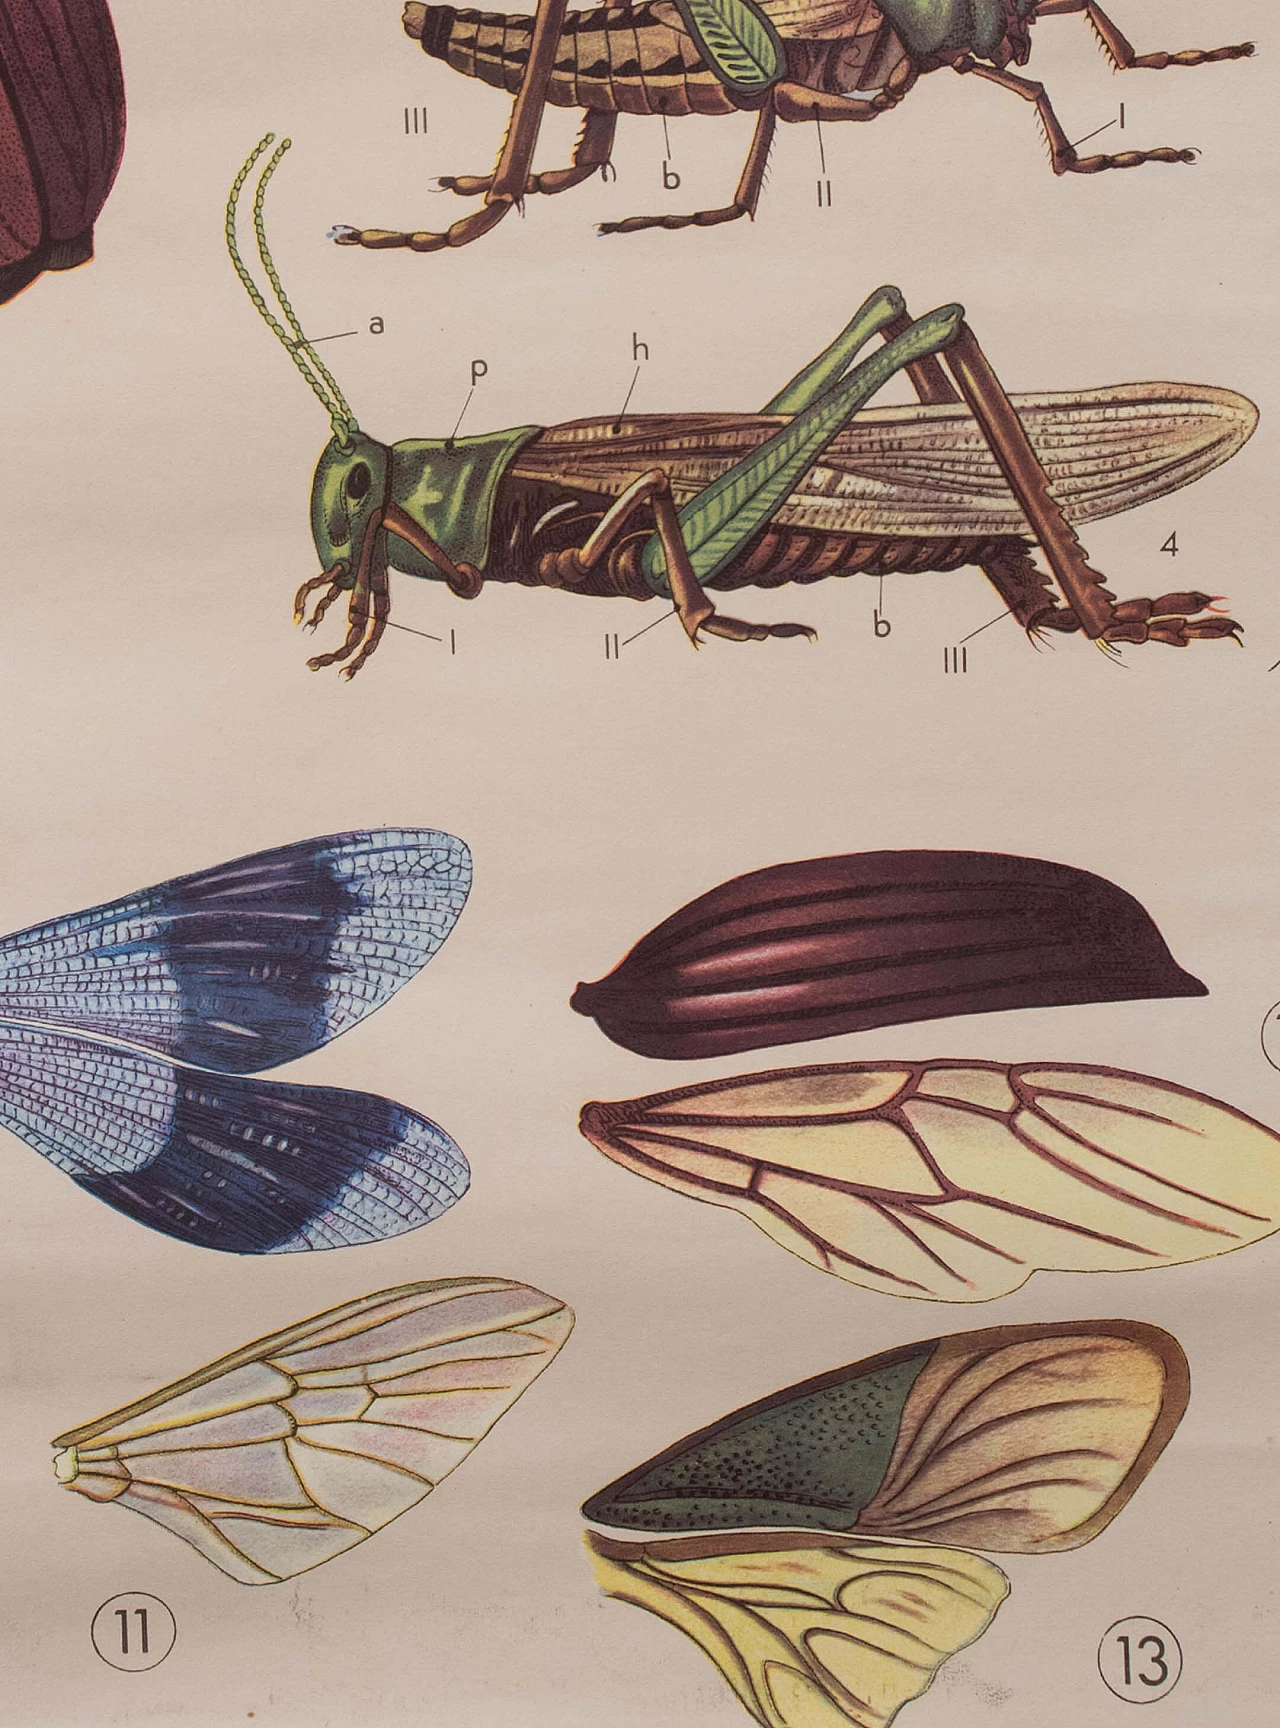 Educational print on insects, Paravia, 1968 1088777